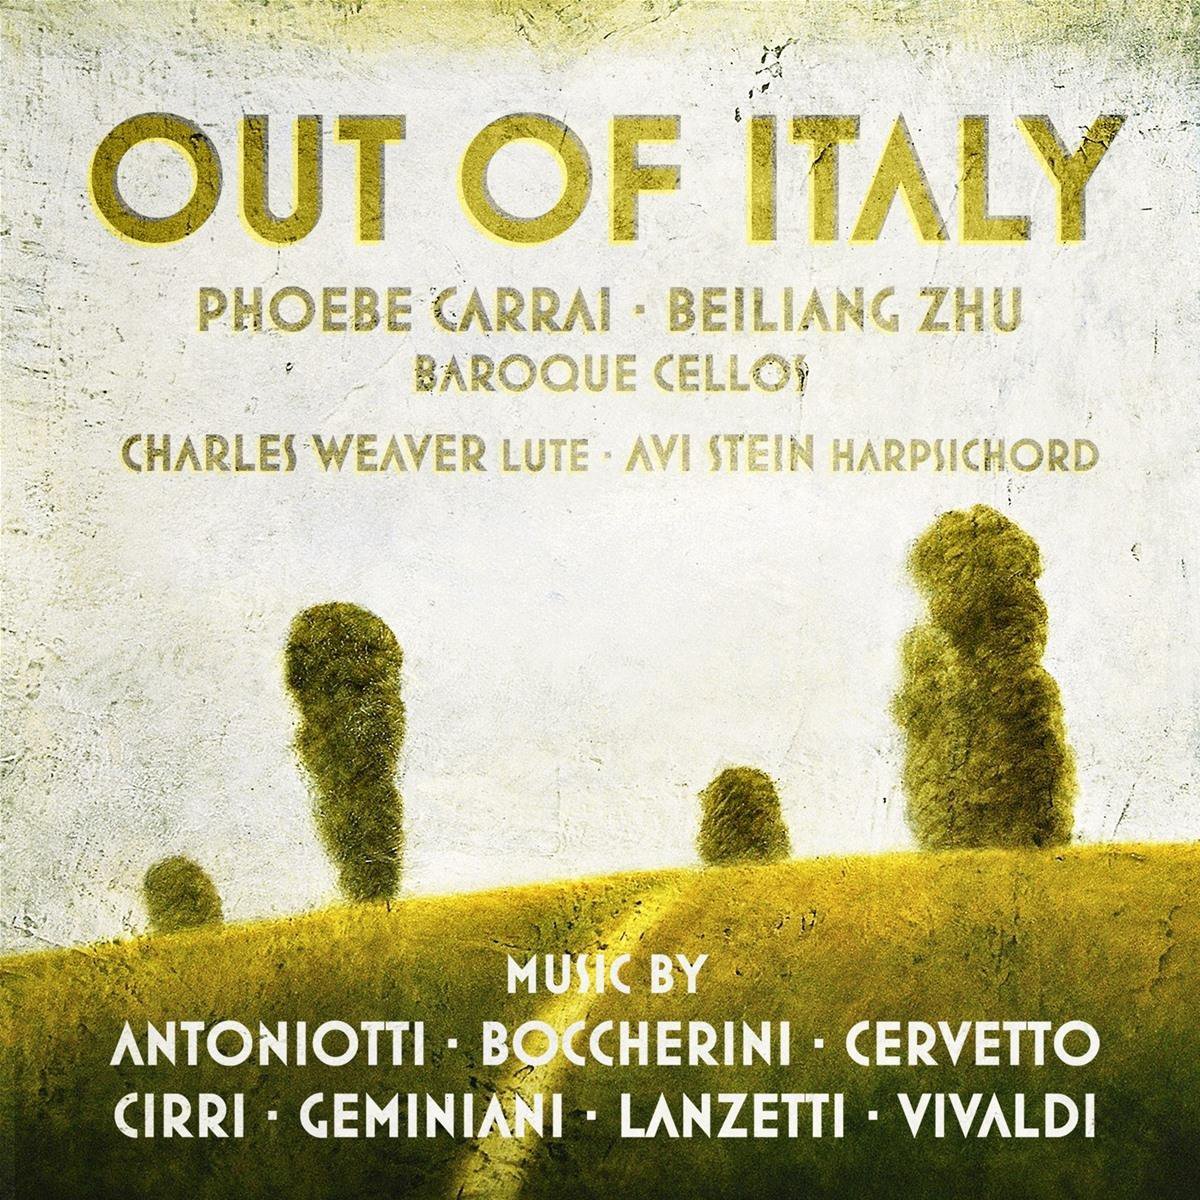 Out of Italy | Phoebe Carrai, Beiliang Zhu, Avi Stein